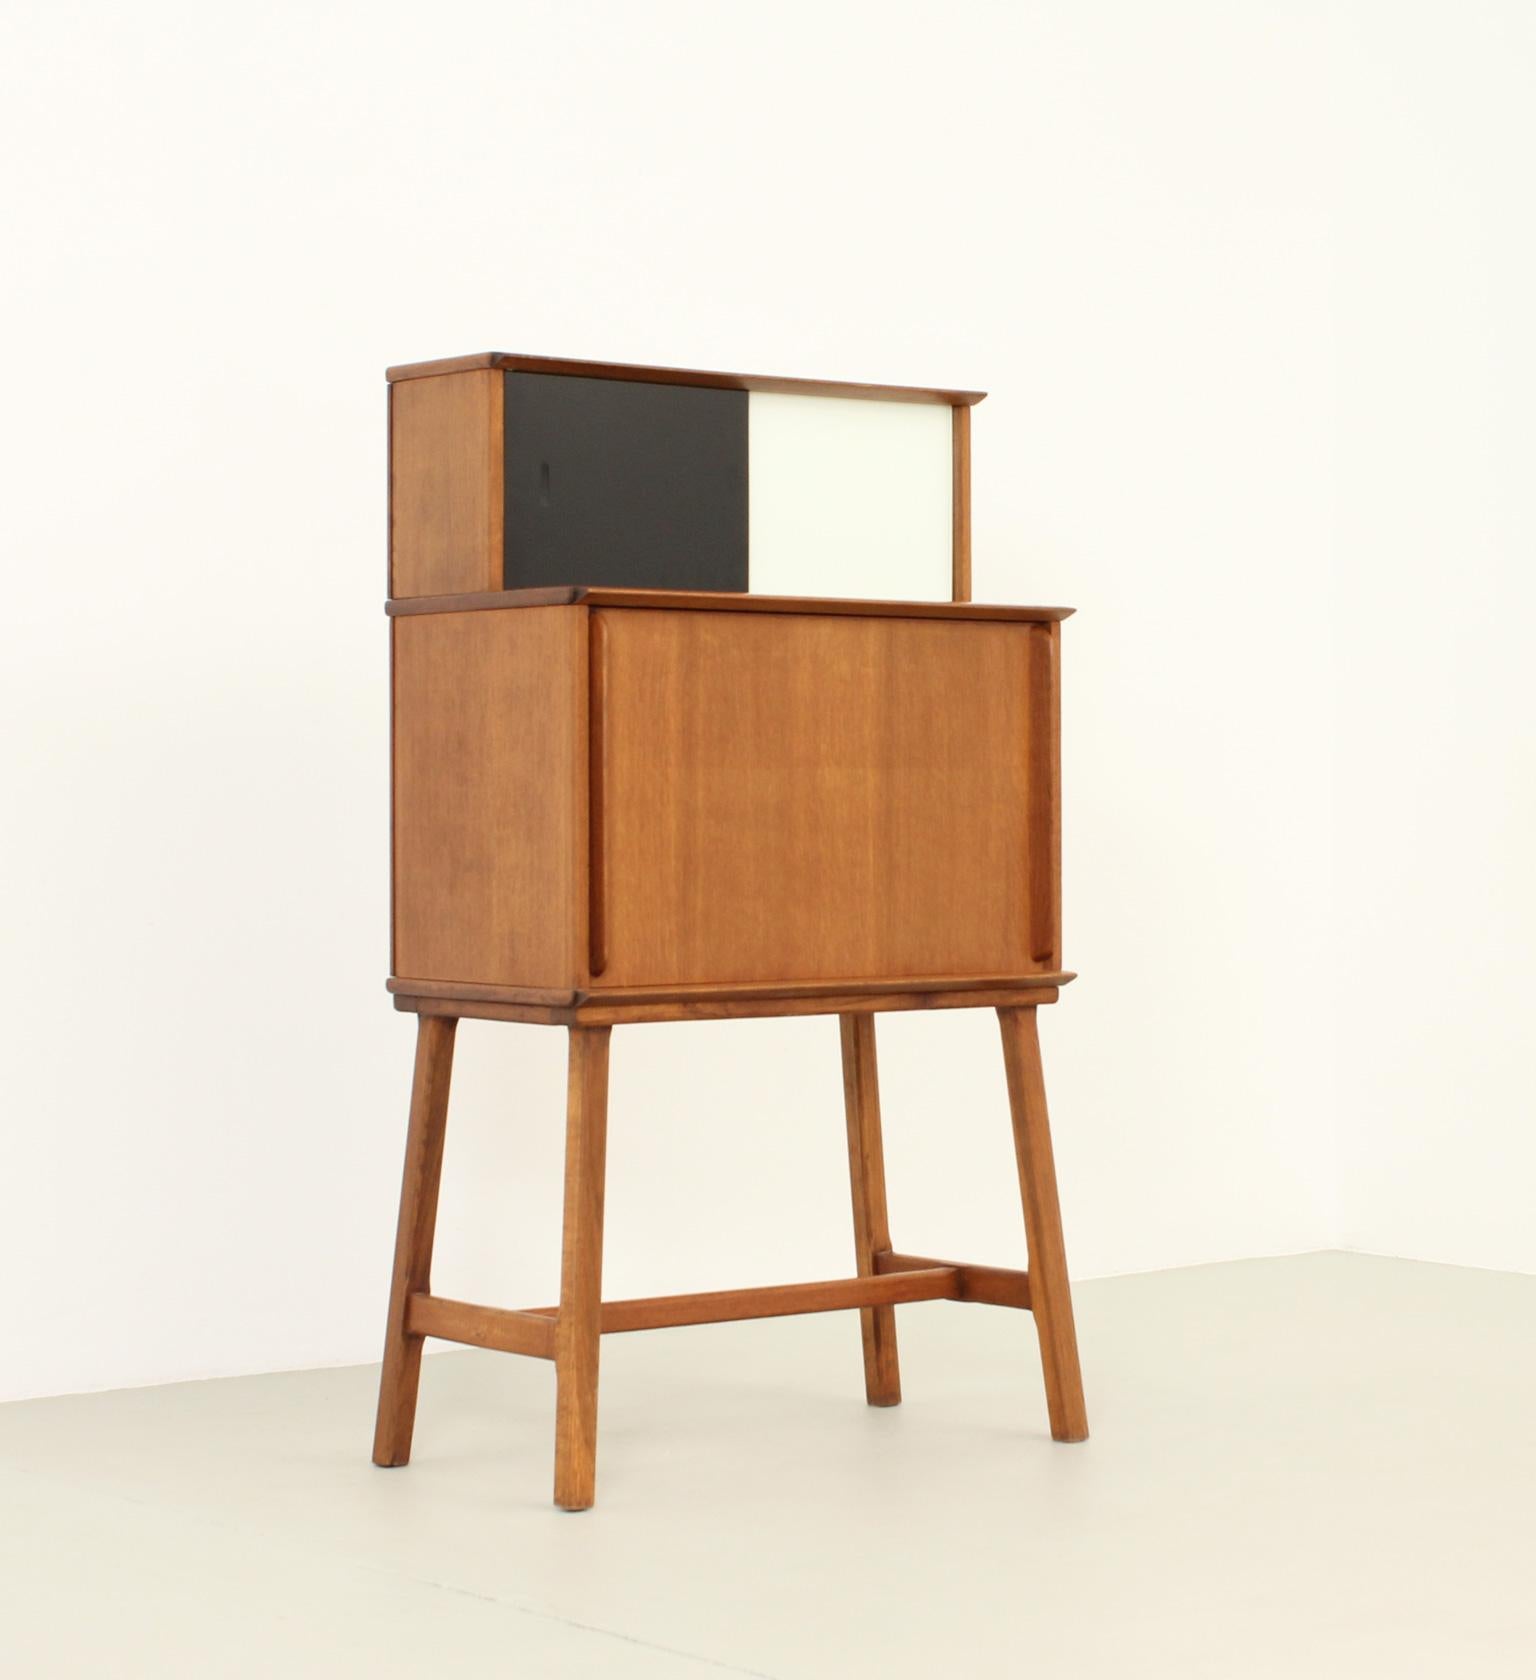 Rare standing desk designed in 1950's by Didier Rozaffy for Meubles Oscar, France. Early edition in oak wood and colored glasses with folding door as a writing desk with storage space inside.